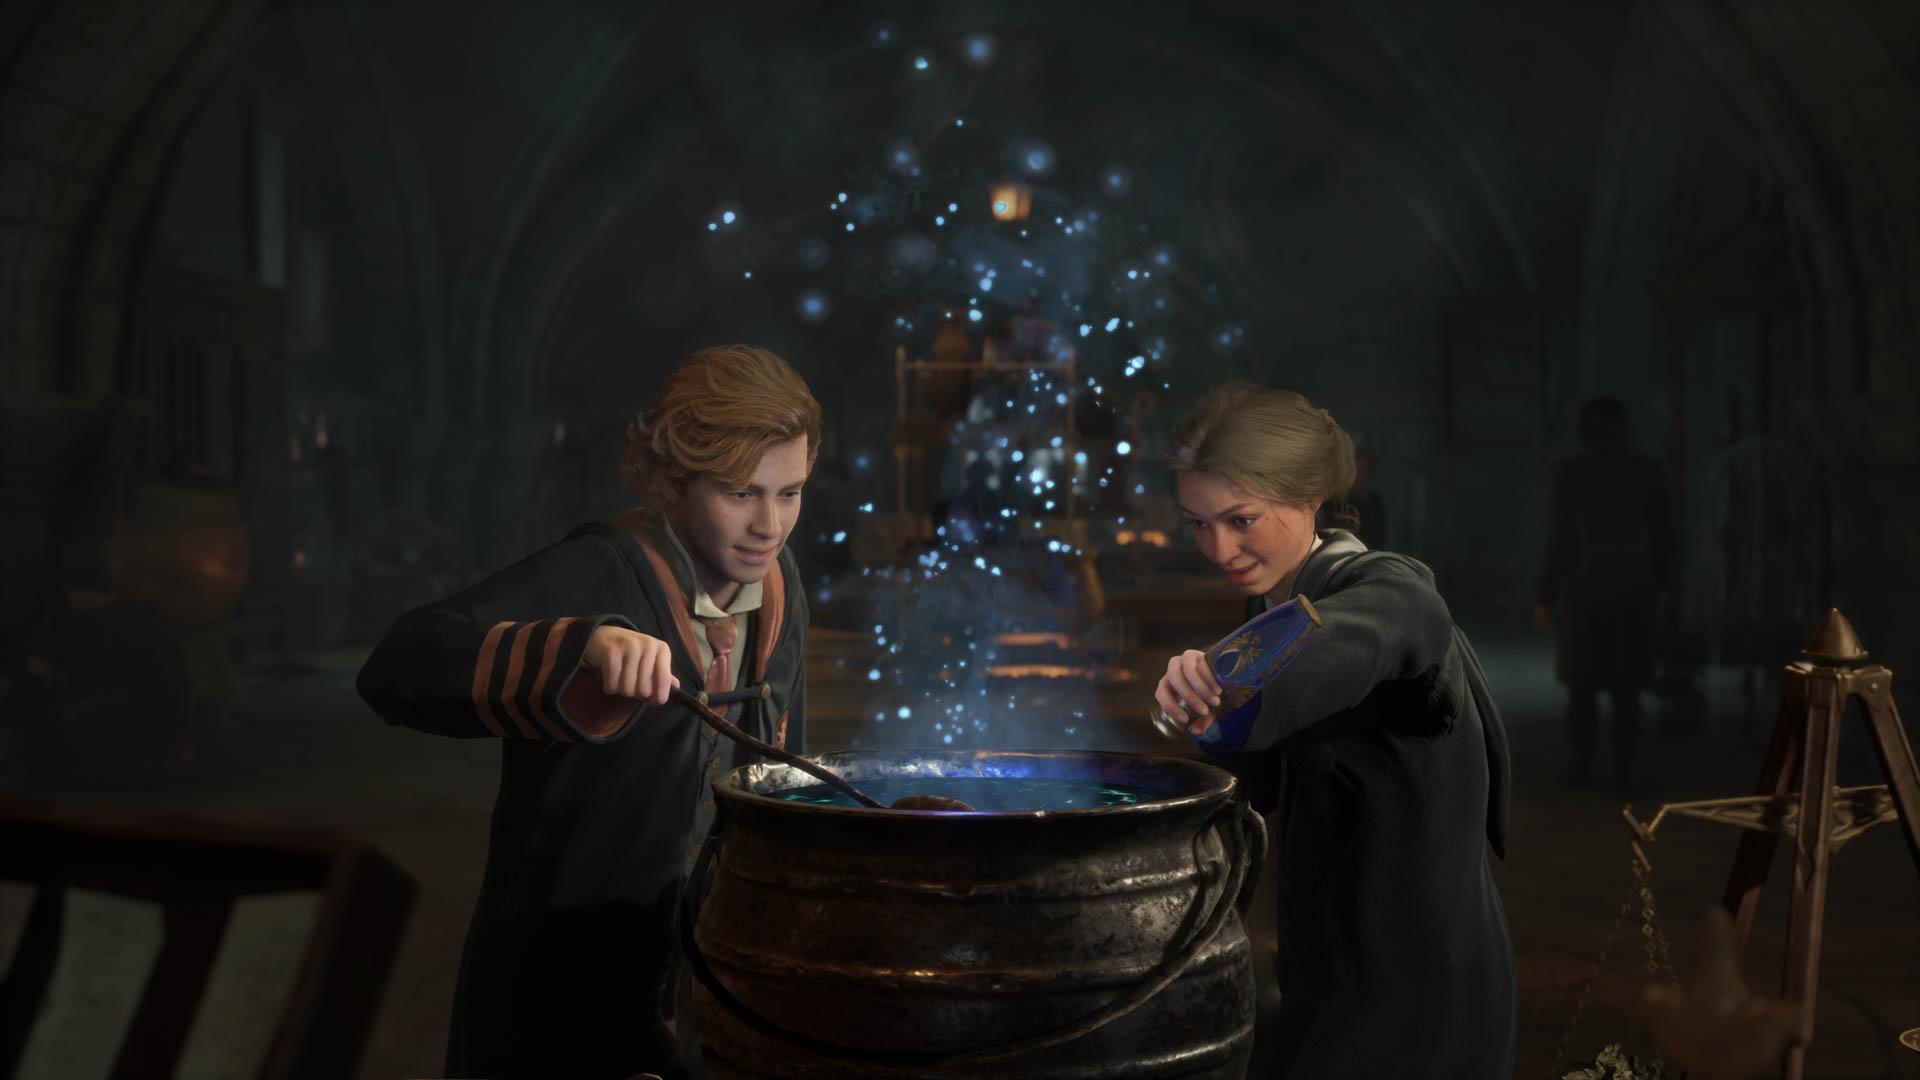 What consoles will Hogwarts legacy be on